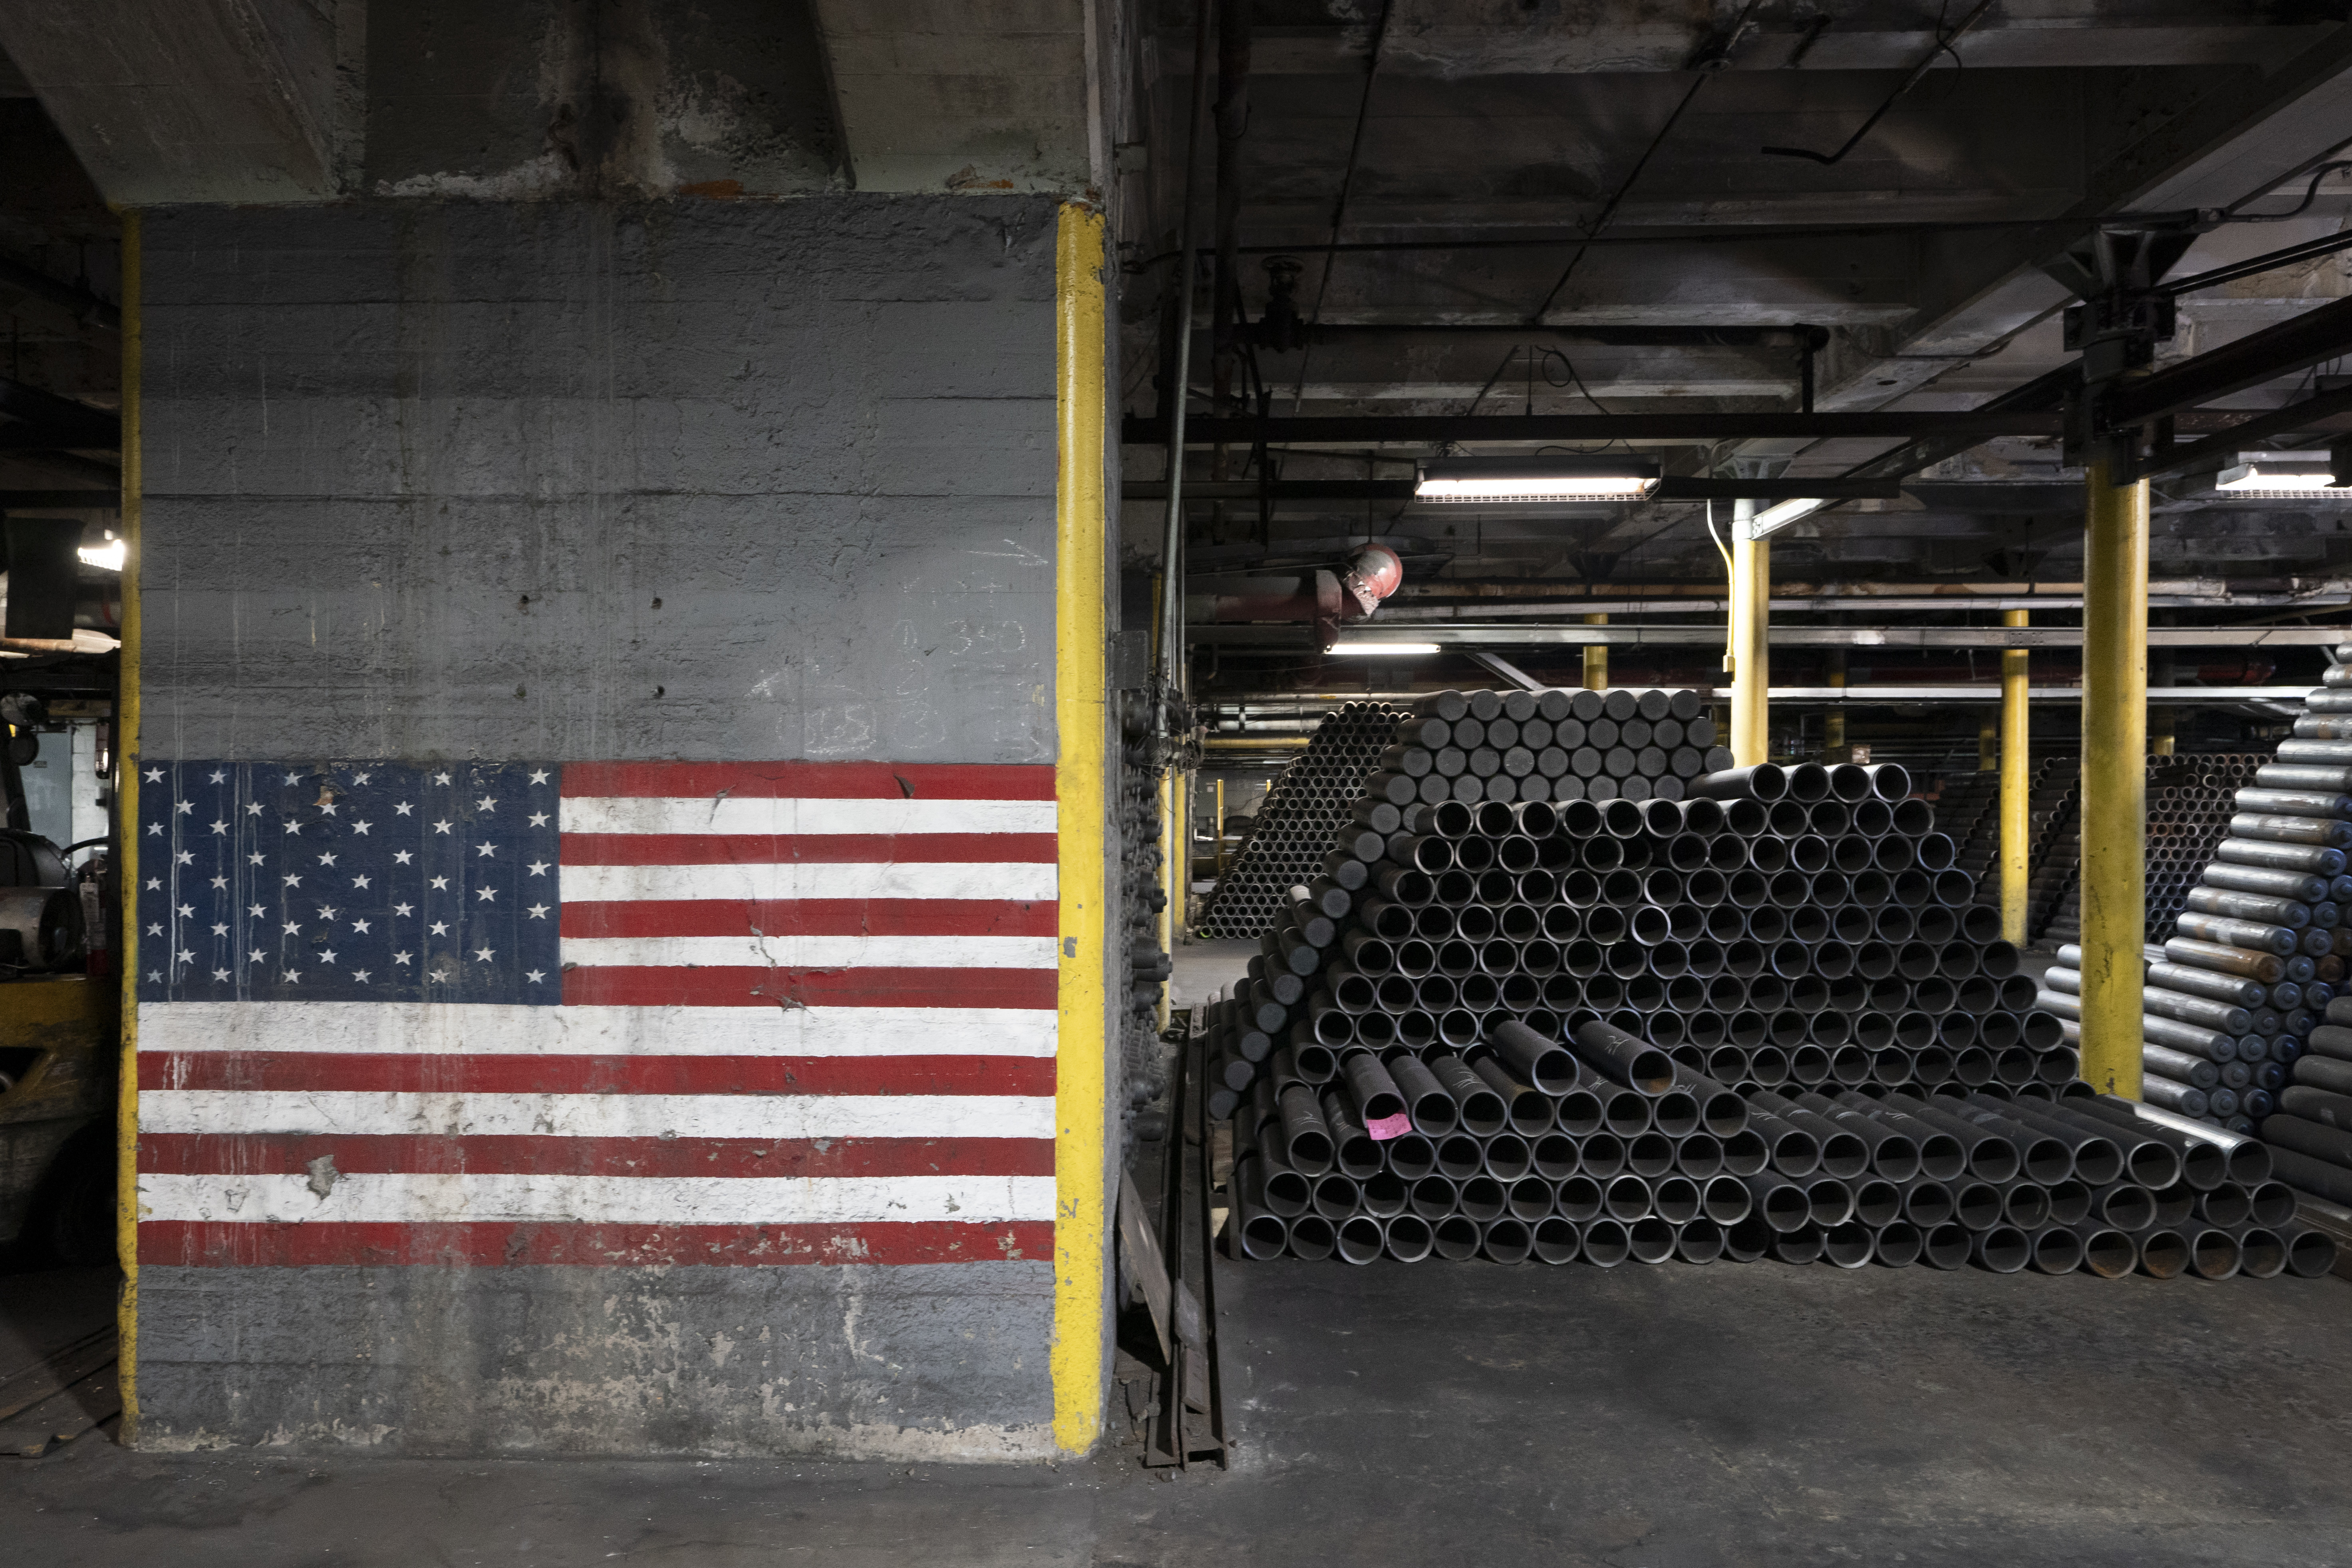 M795 155mm artillery shells are stacked during the manufacturing process at the Scranton Army Ammunition Plant in Scranton, Pa., Thursday, April 13, 2023. (AP Photo/Matt Rourke)

